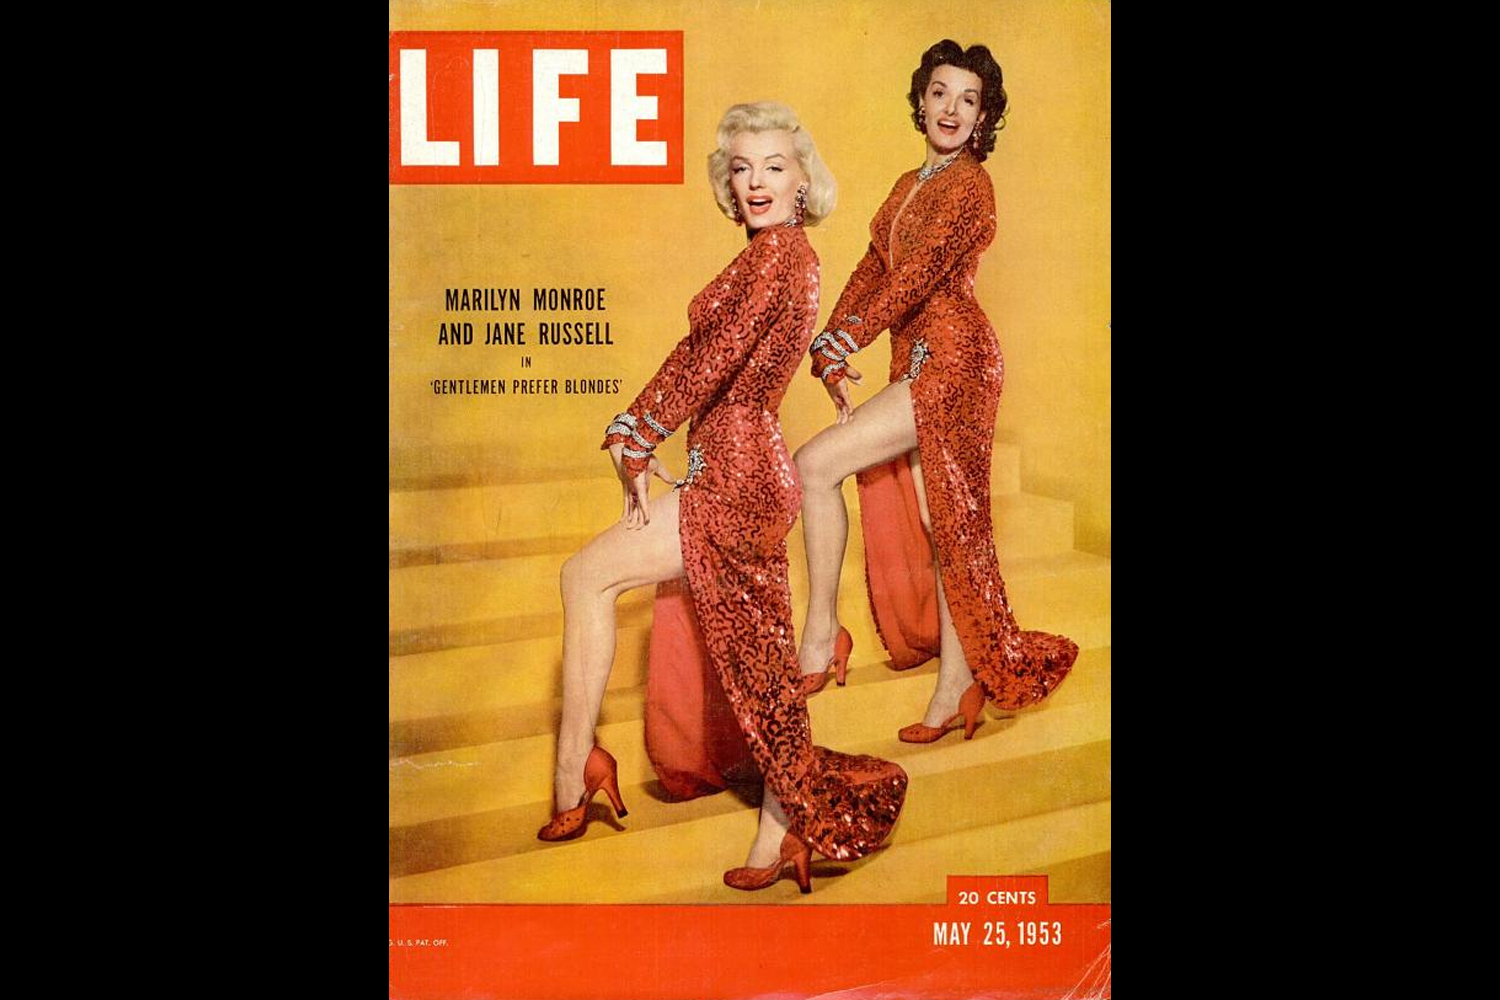 LIFE Magazine, May 25, 1953. Marilyn Monroe and Jane Russell, photographed by Ed Clark.